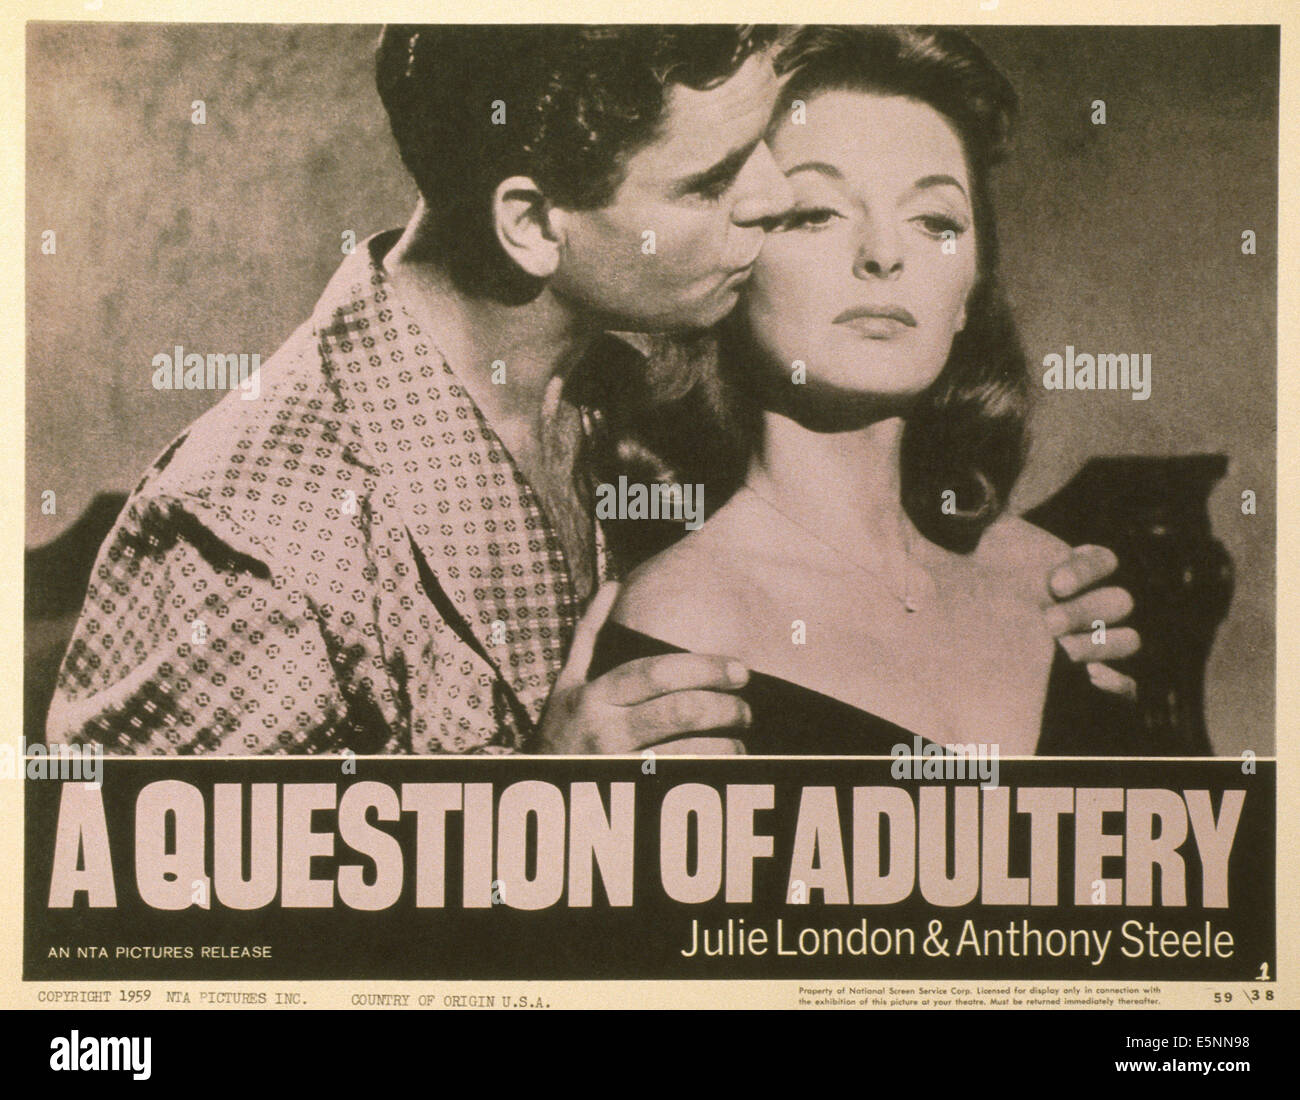 A QUESTION OF ADULTERY, US lobbycard, from left: Anthony Steel, Julie London, 1958 Stock Photo